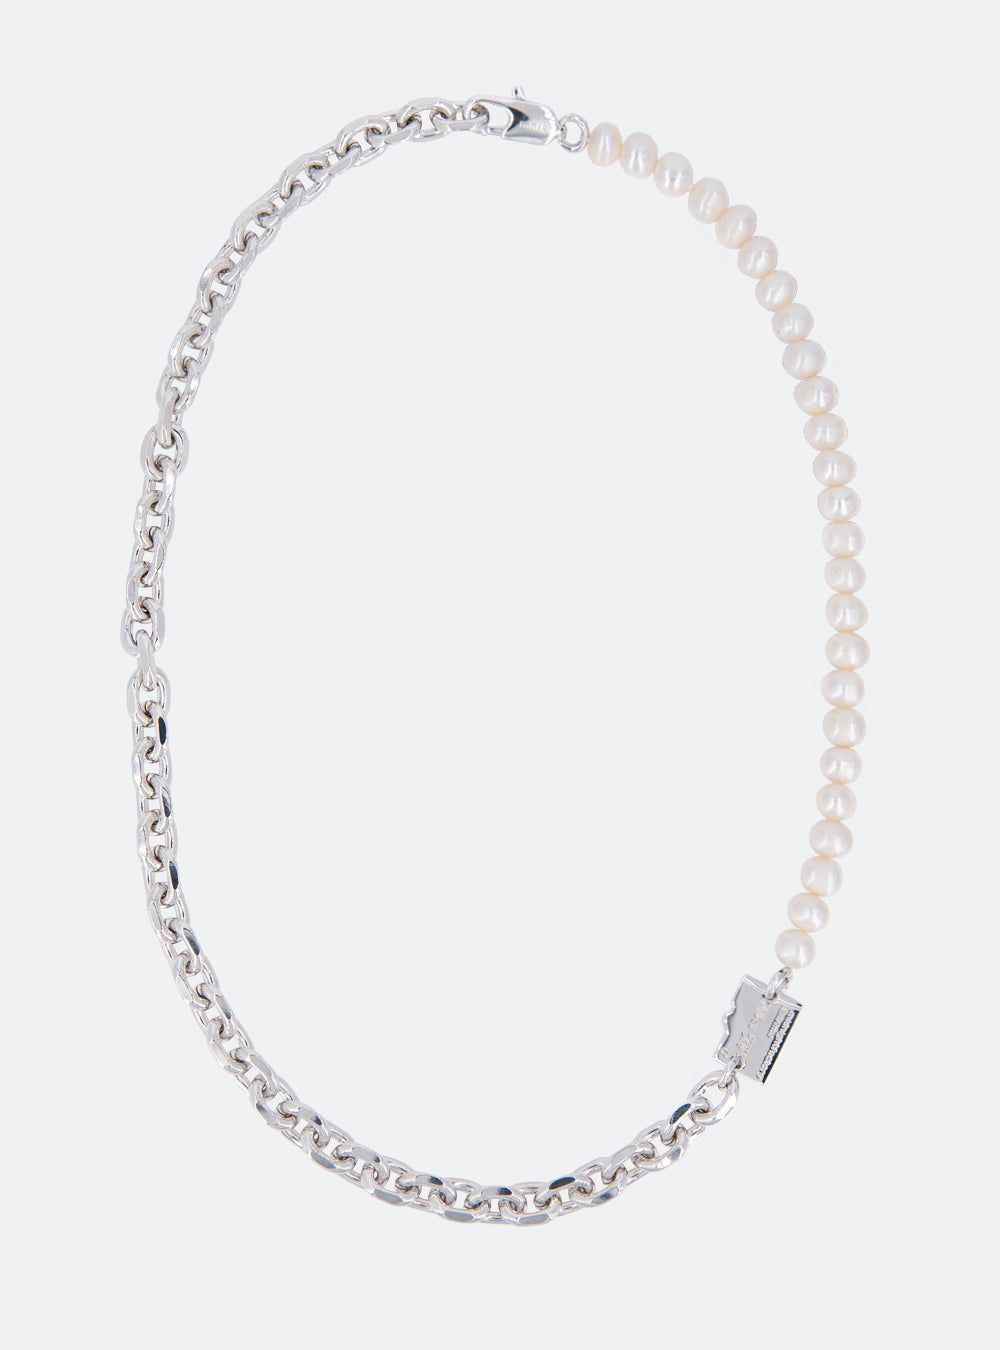 A Micro-SD white freshwater pearls necklace with an adjustable length chain on a white background, pre-order from MIDNIGHTFACTORY.